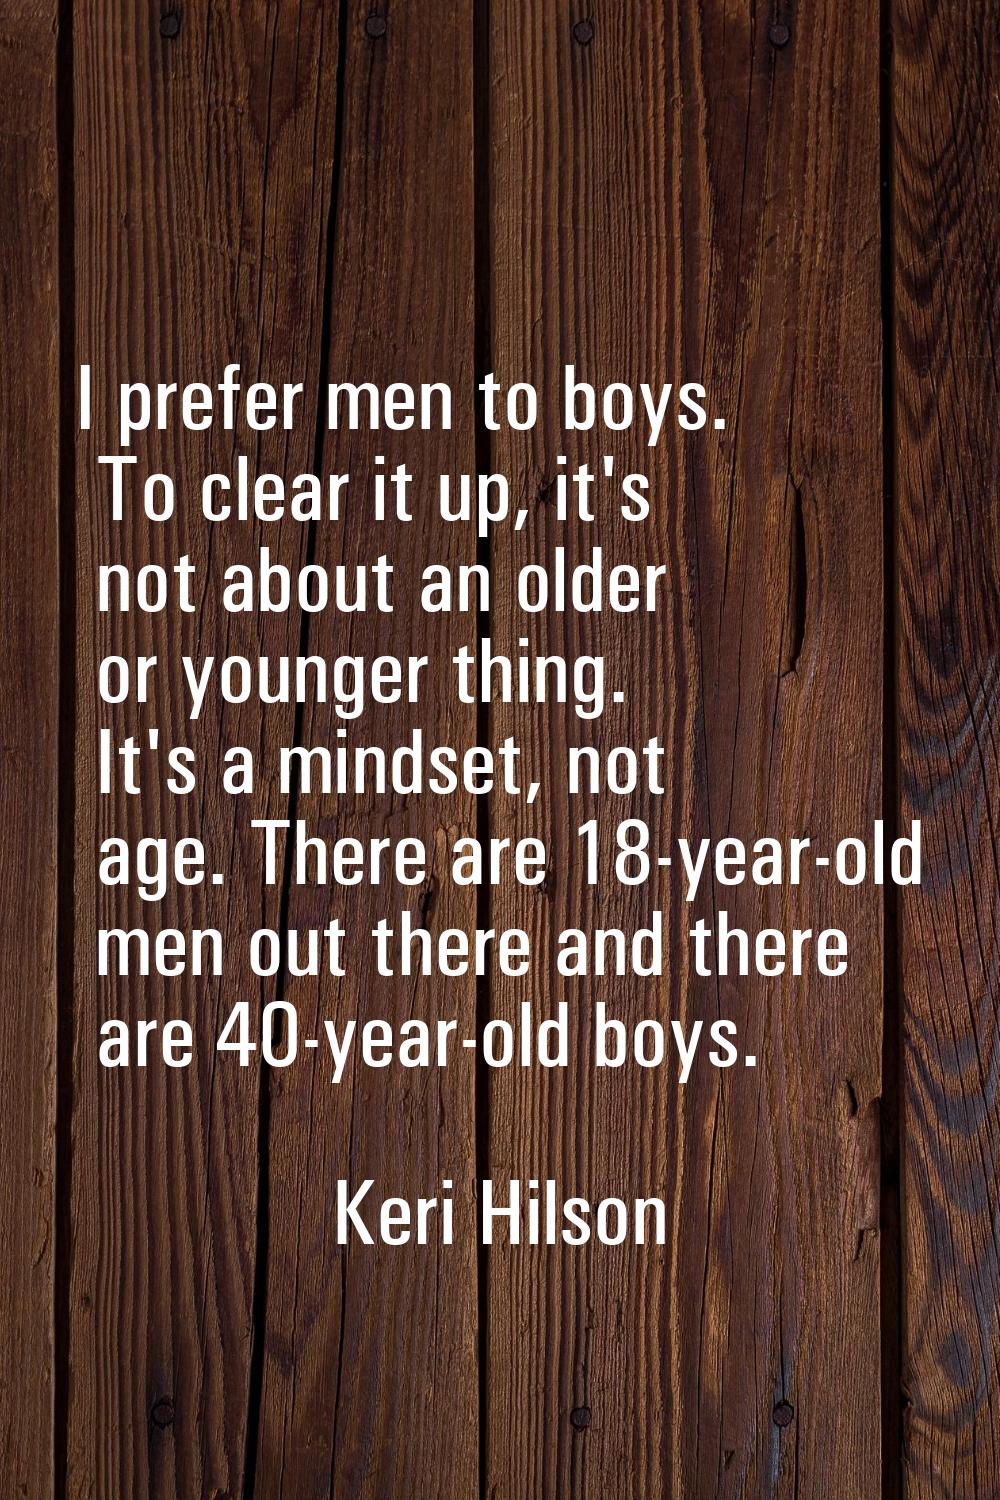 I prefer men to boys. To clear it up, it's not about an older or younger thing. It's a mindset, not